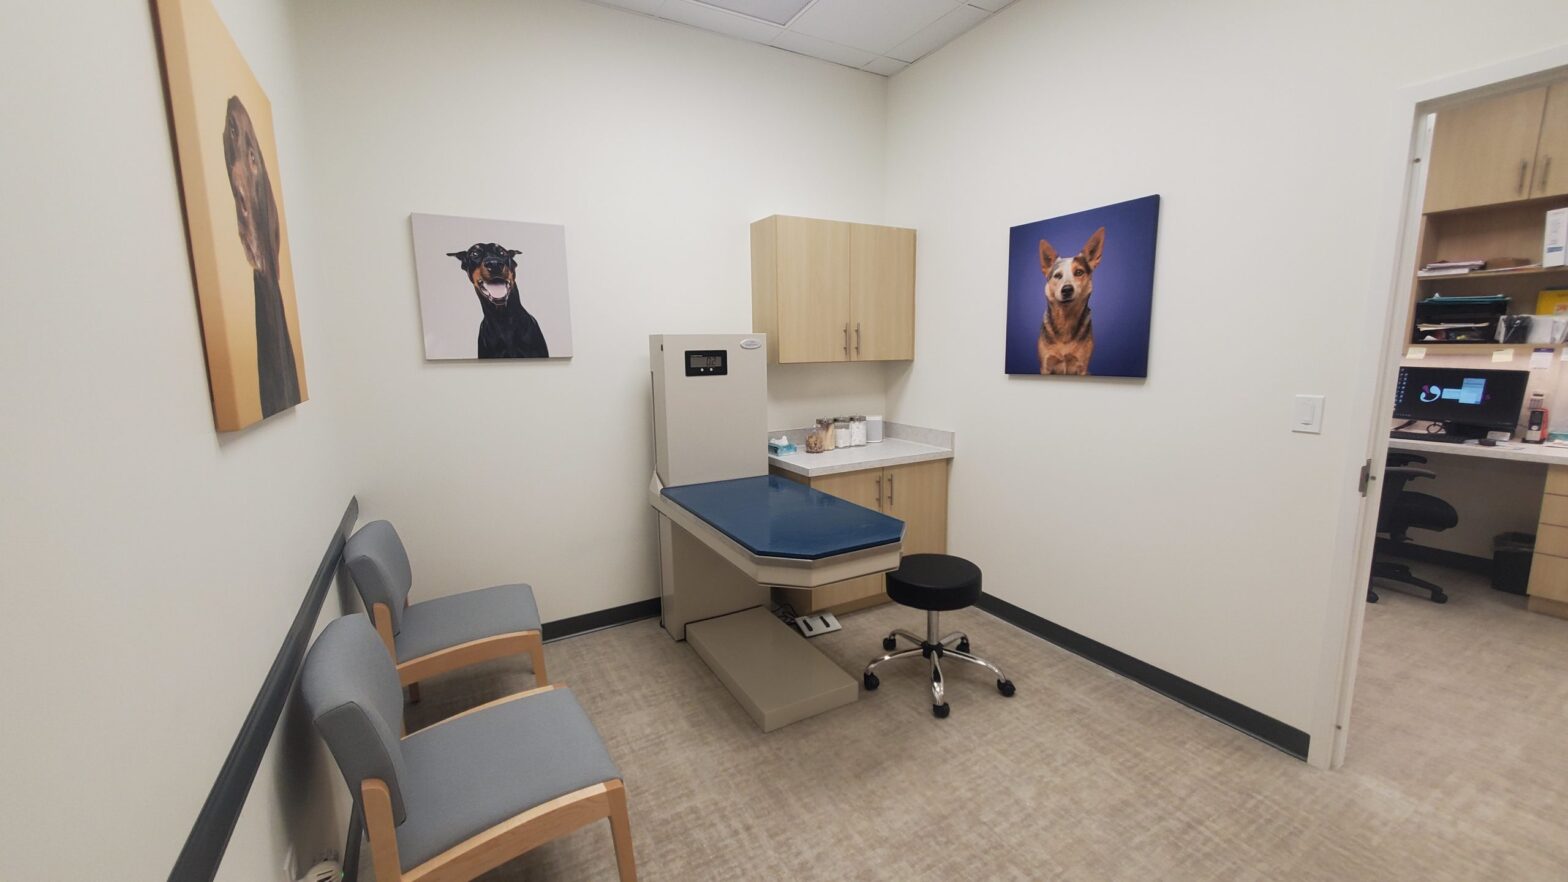 Featured image for post: UrgentVet Opening Clinic in Southlake